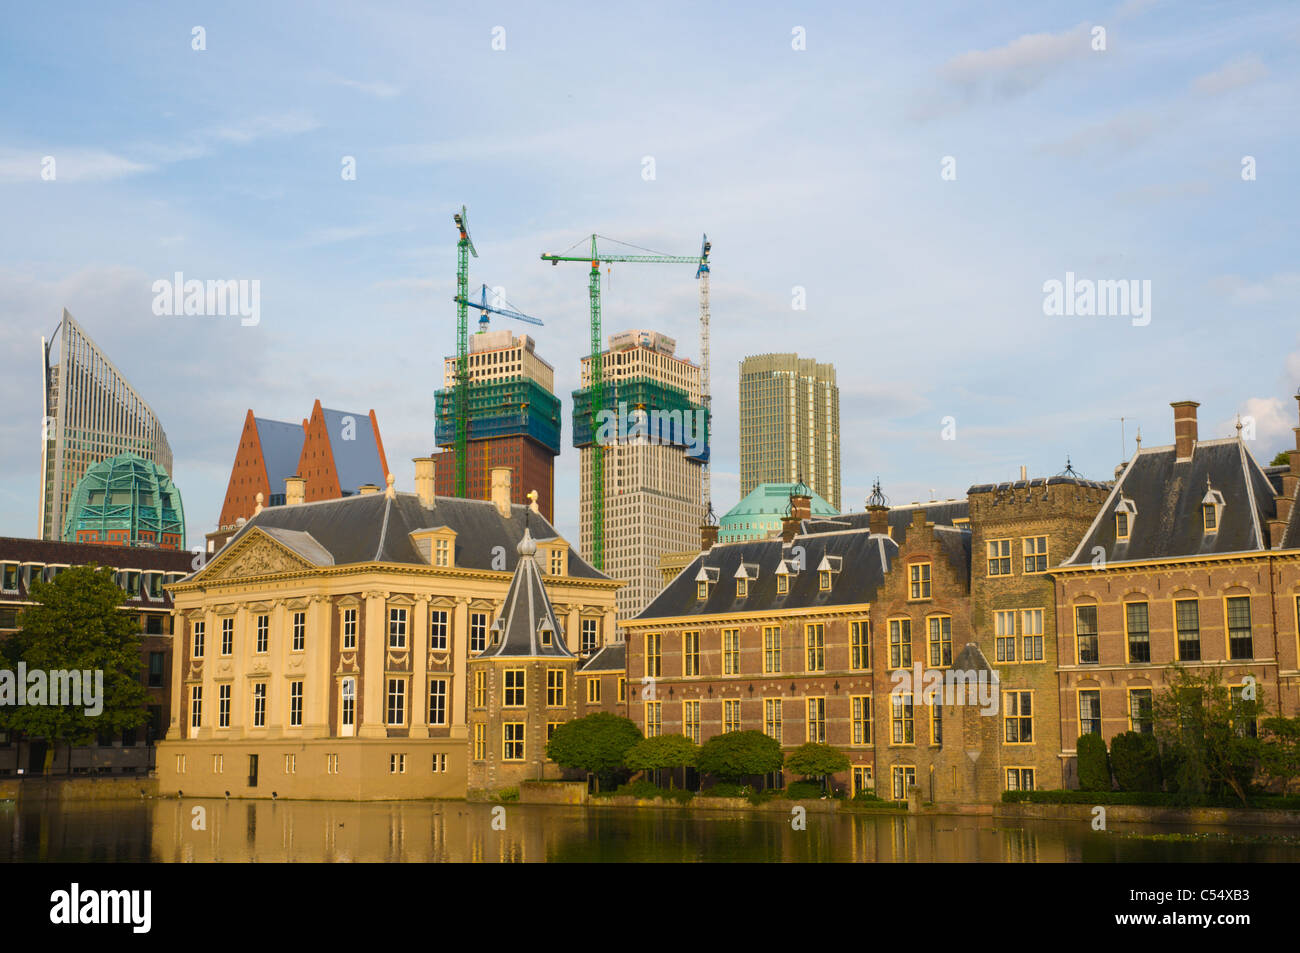 Construction cranes behind Mauritshuis and Binnenhof palace complex by Hofvijver lake Den Haag the Hague the Netherlands Europe Stock Photo